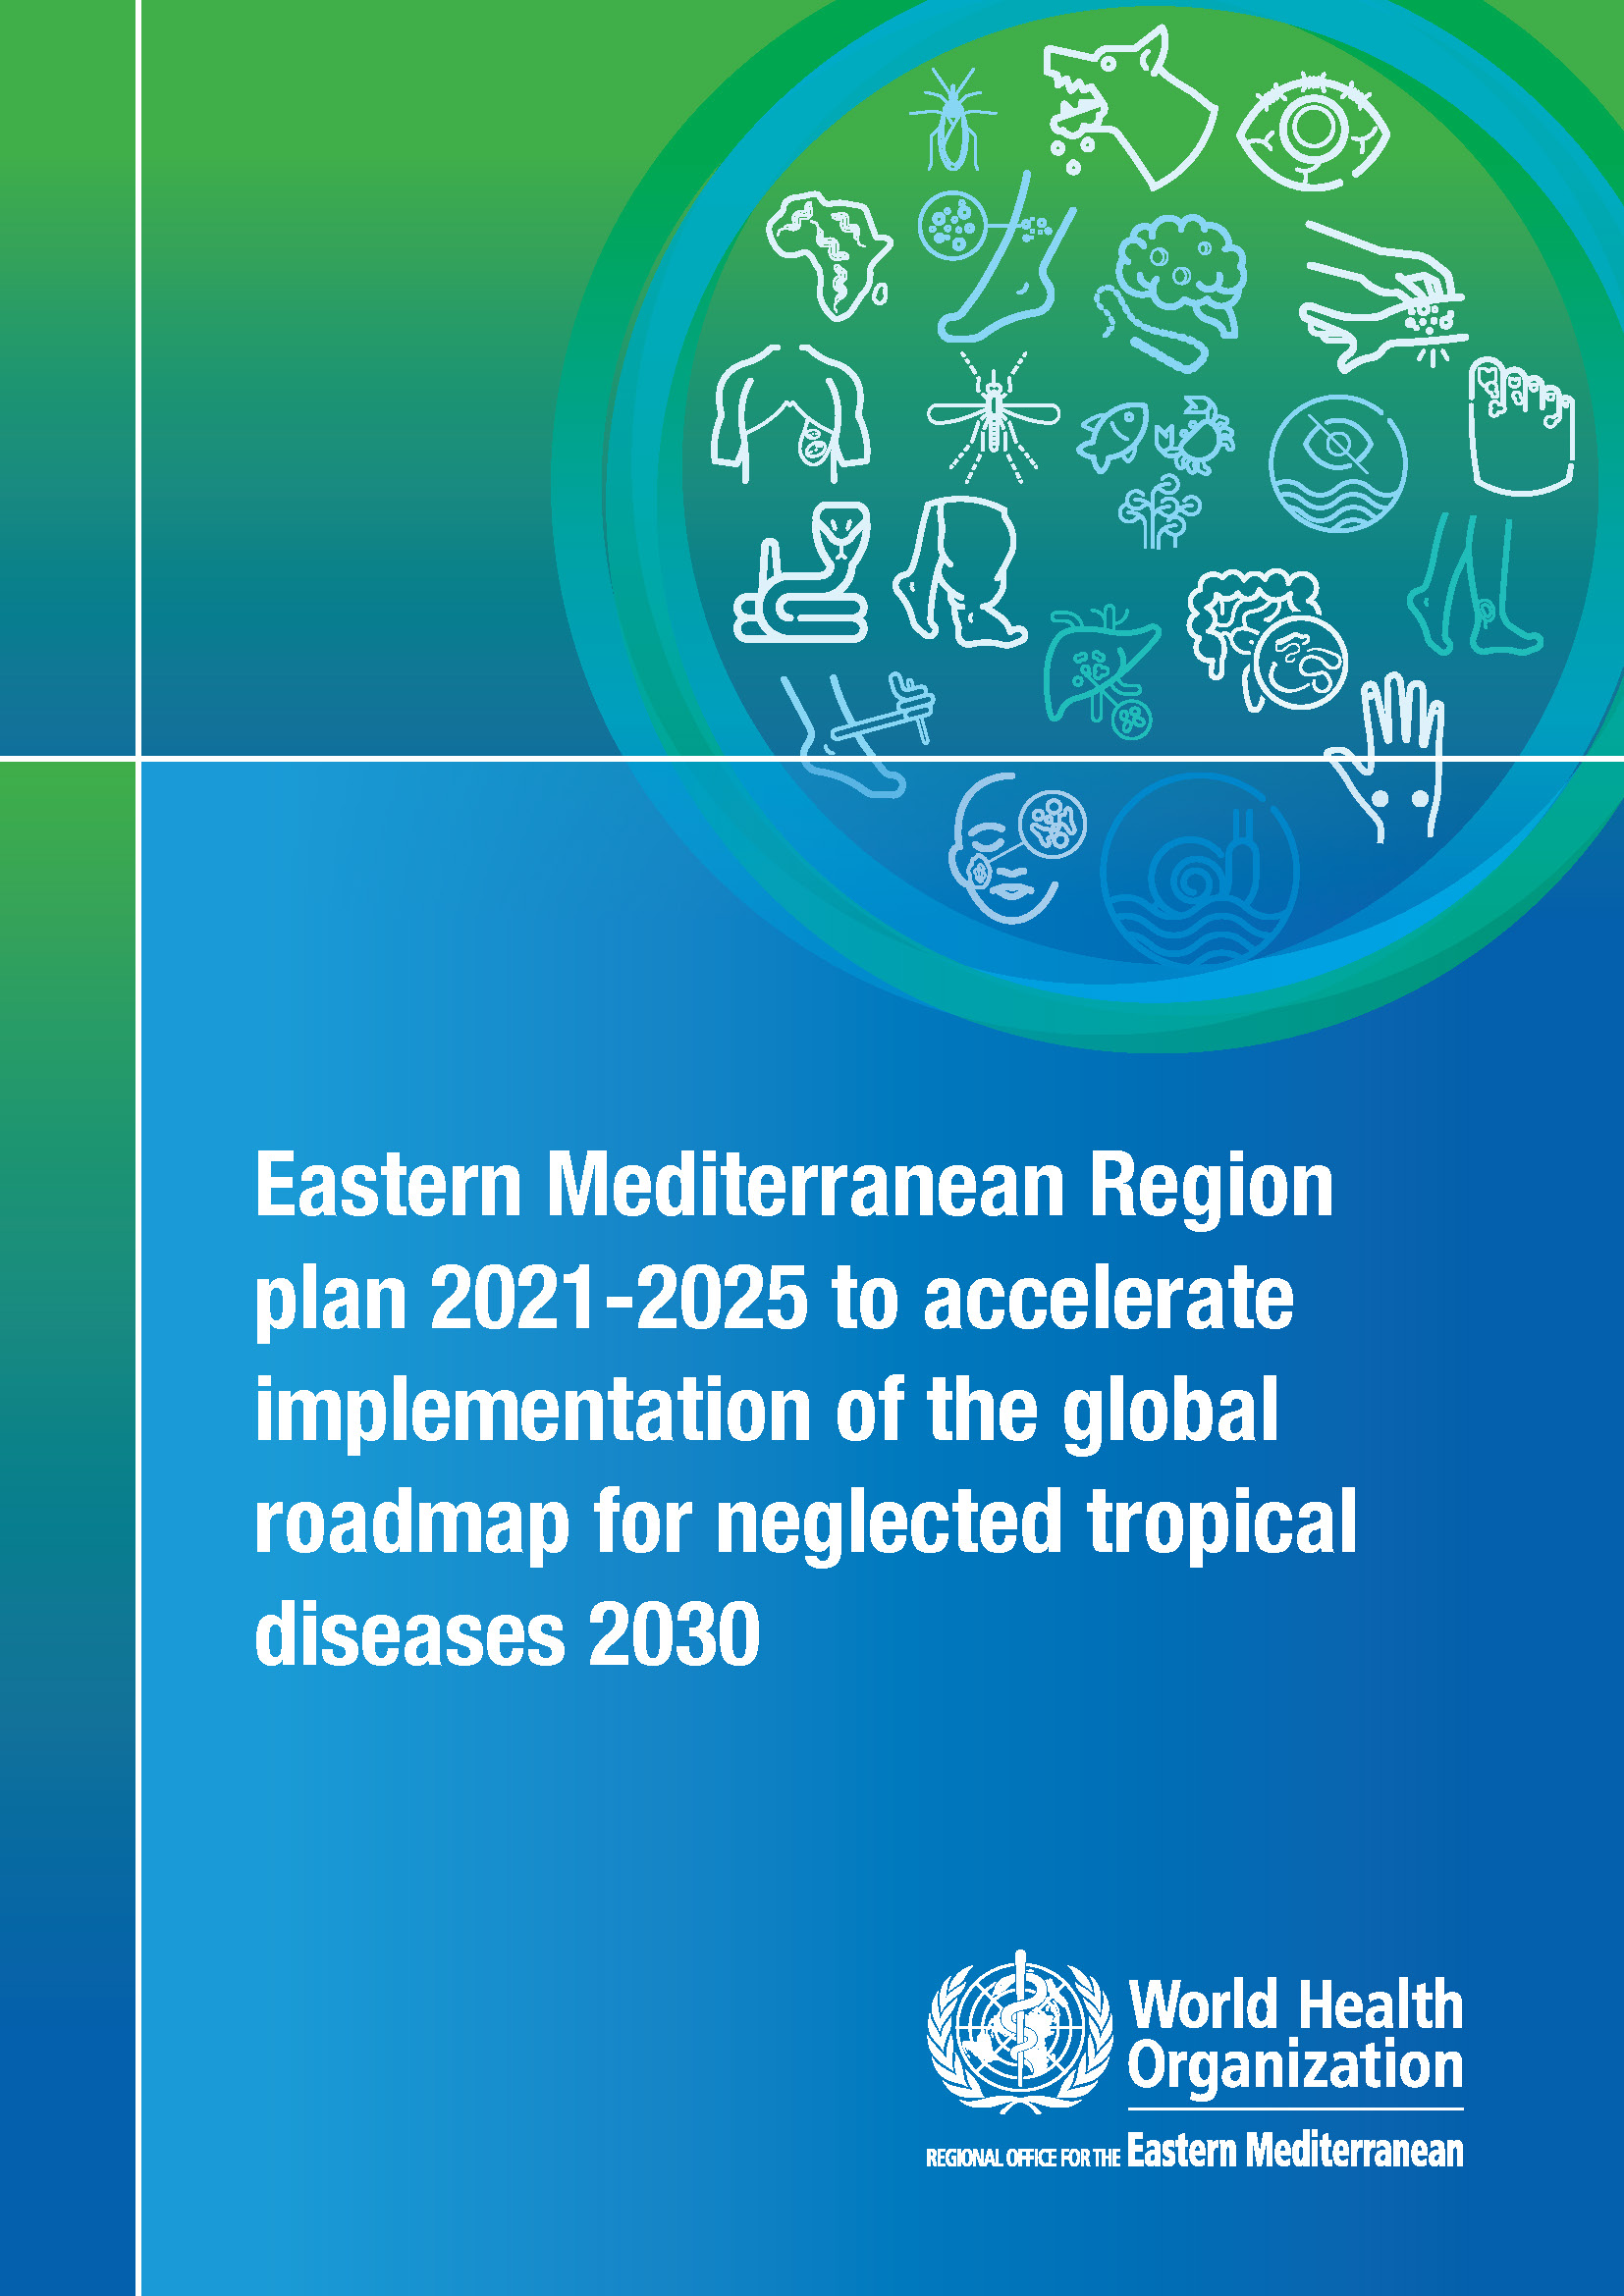 Eastern Mediterranean Region plan 2021-2025 to accelerate implementation of the global roadmap for neglected tropical diseases 2030